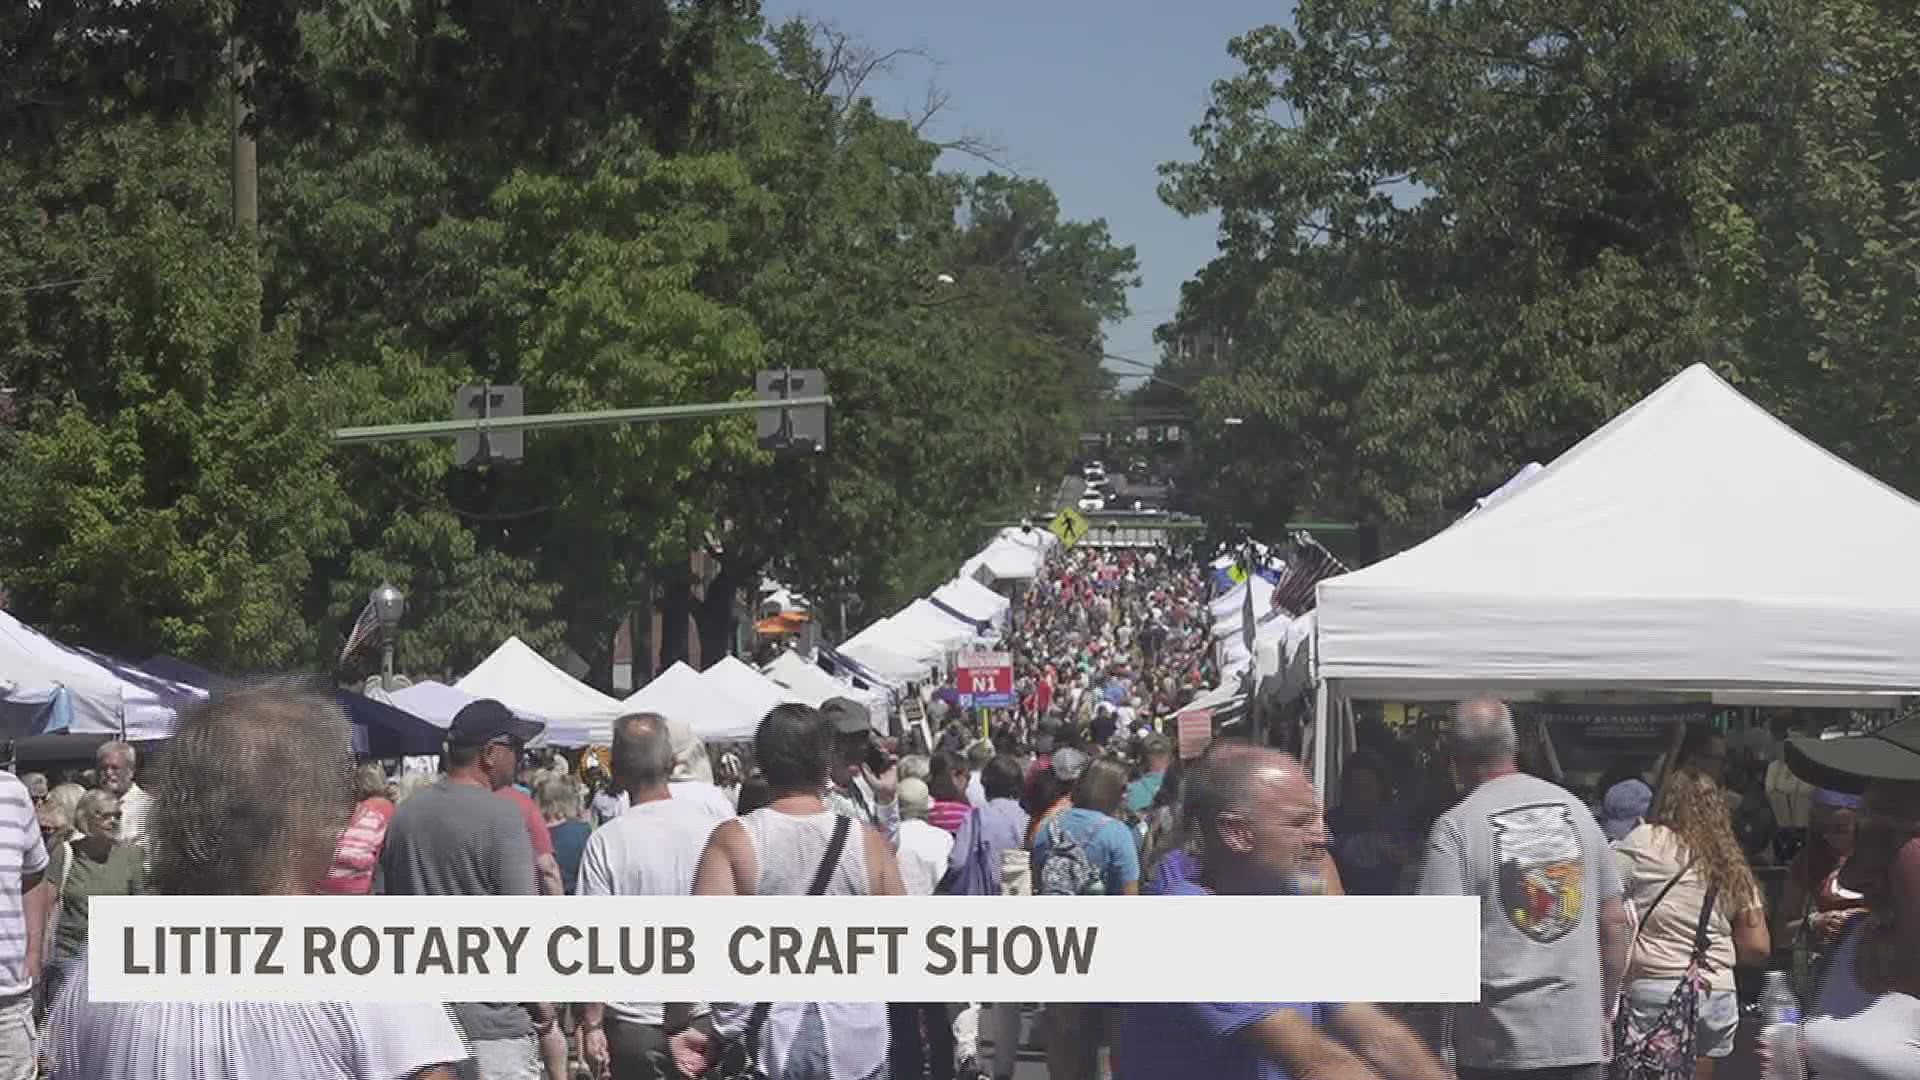 The Lititz Rotary Club has been putting the craft show on since 1979. The 43-year-old event features vendors from near and far, food and entertainment.